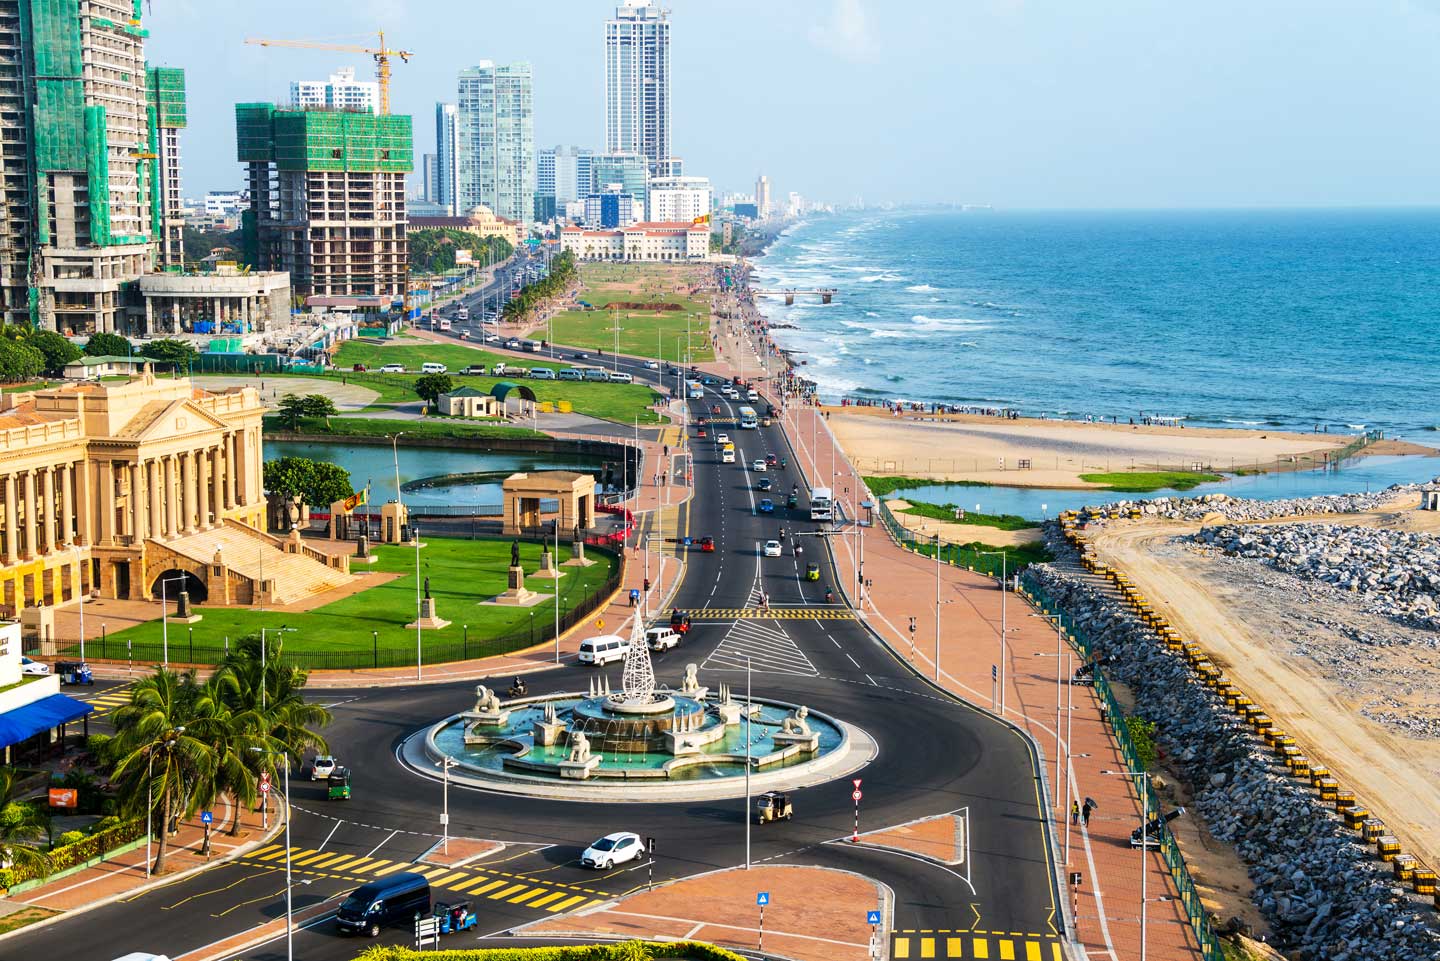 A roundabout and skyline overlooking the sea in Colombo, Sri Lanka